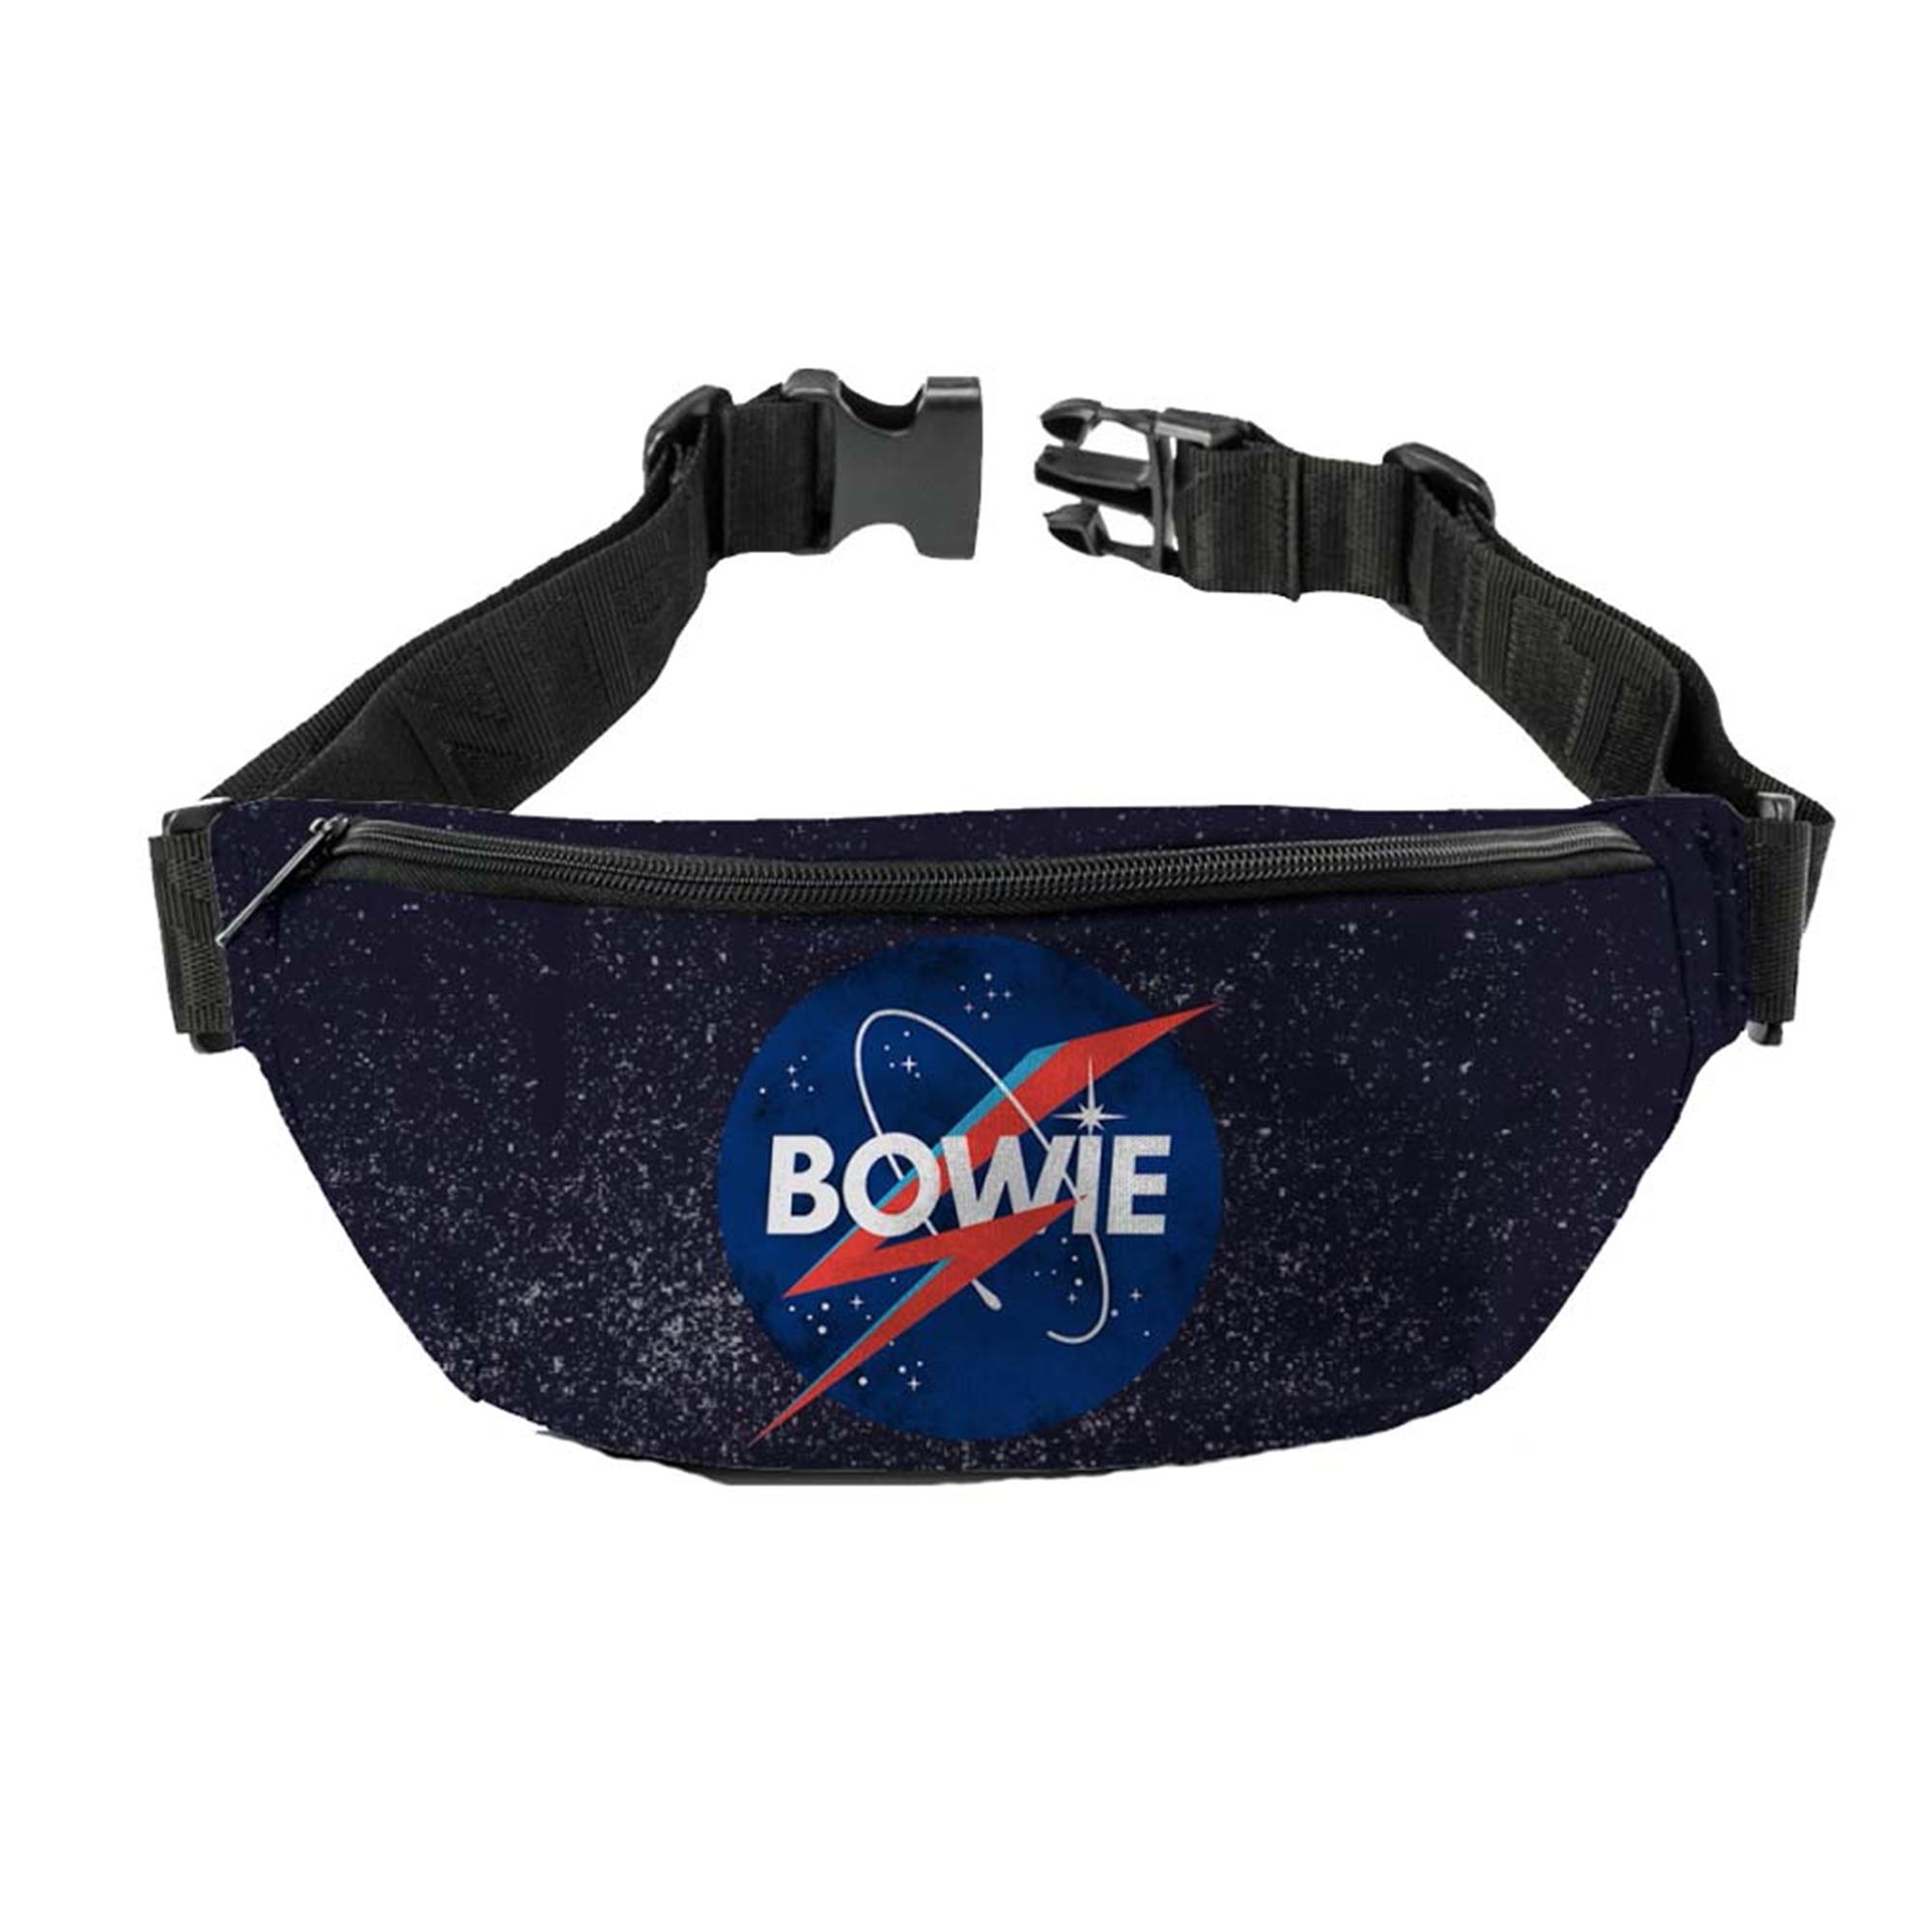 David Bowie Space Fanny Pack